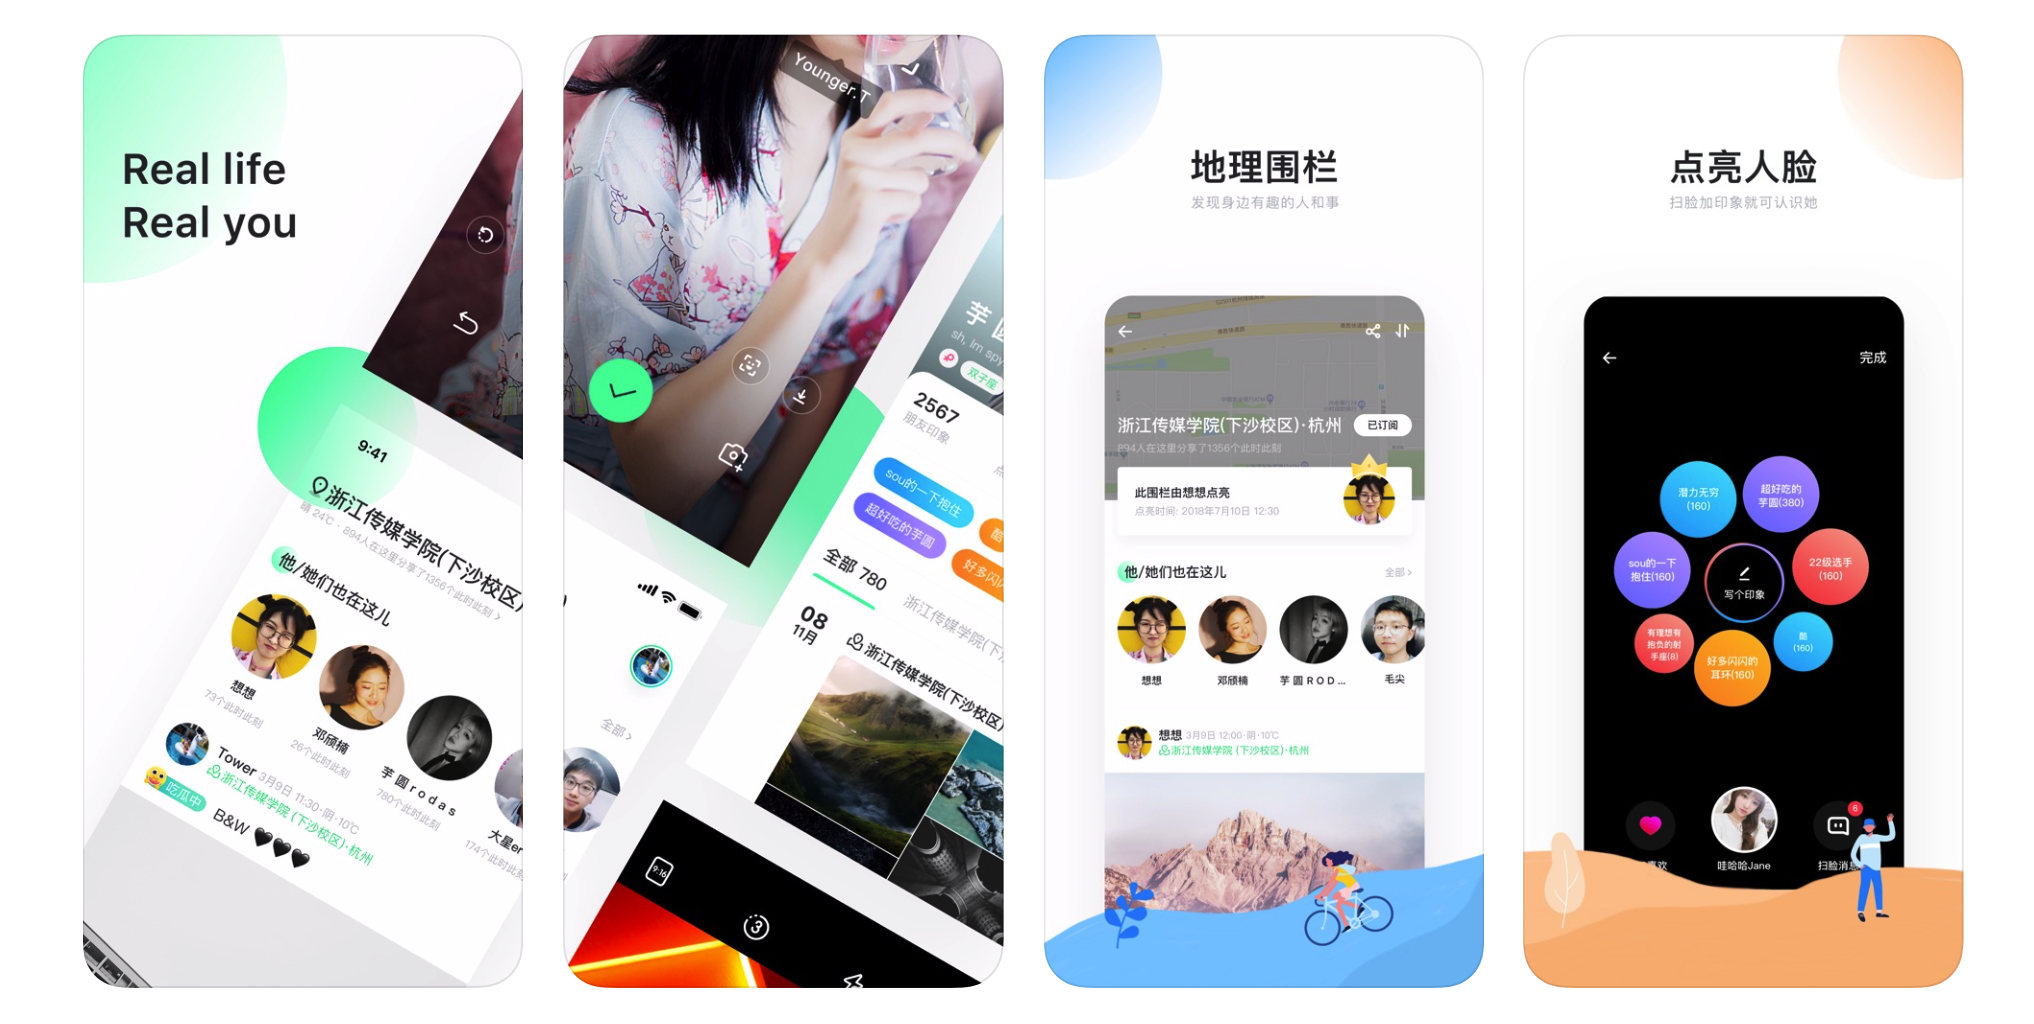 Alibaba unveils new app for college students, picking up social dream shattered by WeChat